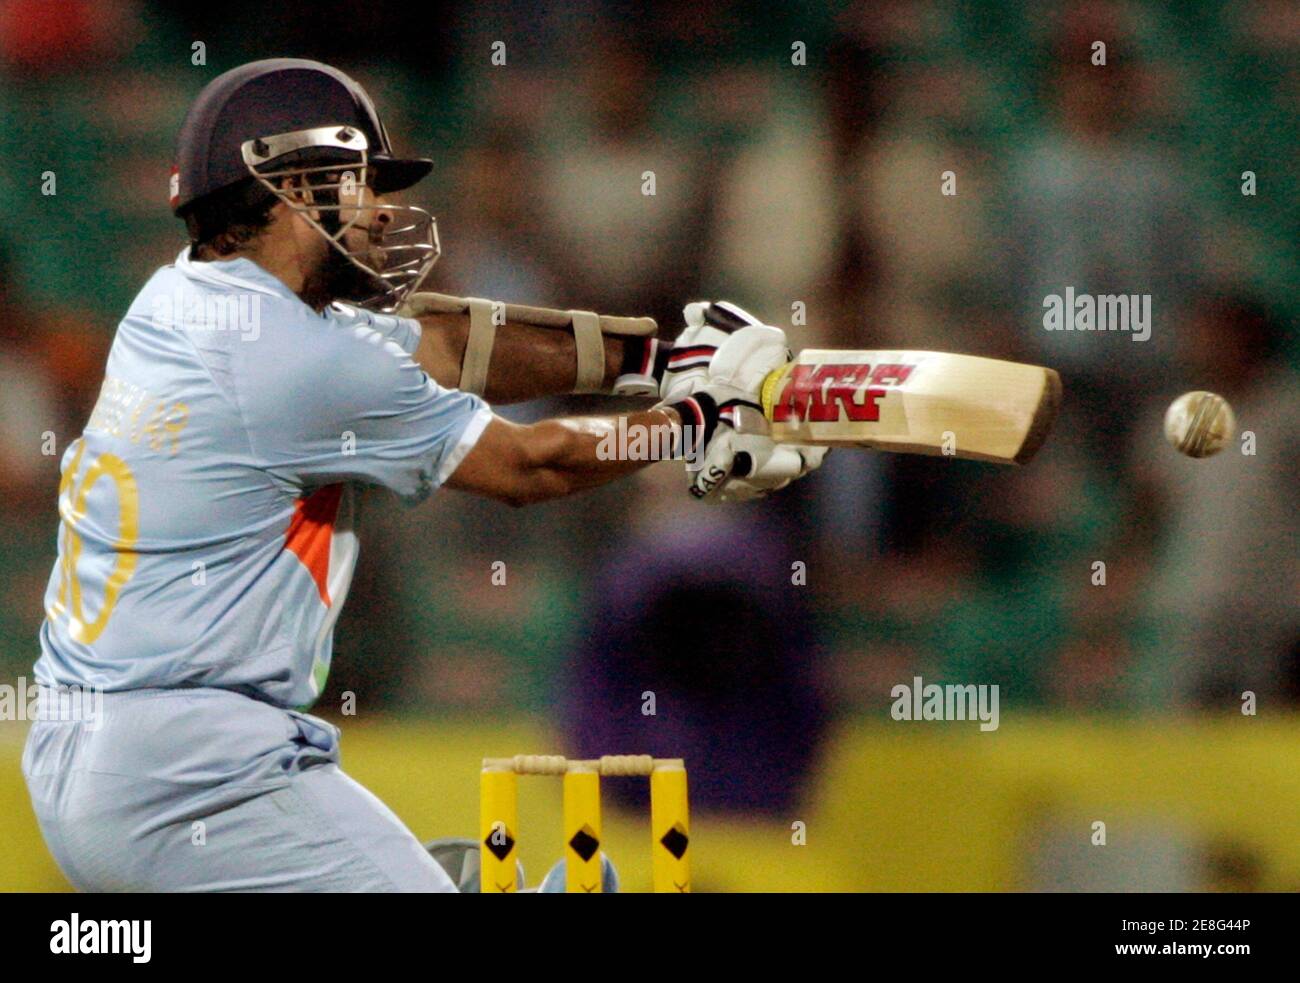 India's Sachin Tendulkar hits a boundary off the bowling of Australia's James Hopes as he guides India to win the first final of the tri-series one-day international cricket matches in Sydney March 2, 2008. REUTERS/Will Burgess    (AUSTRALIA) Stock Photo